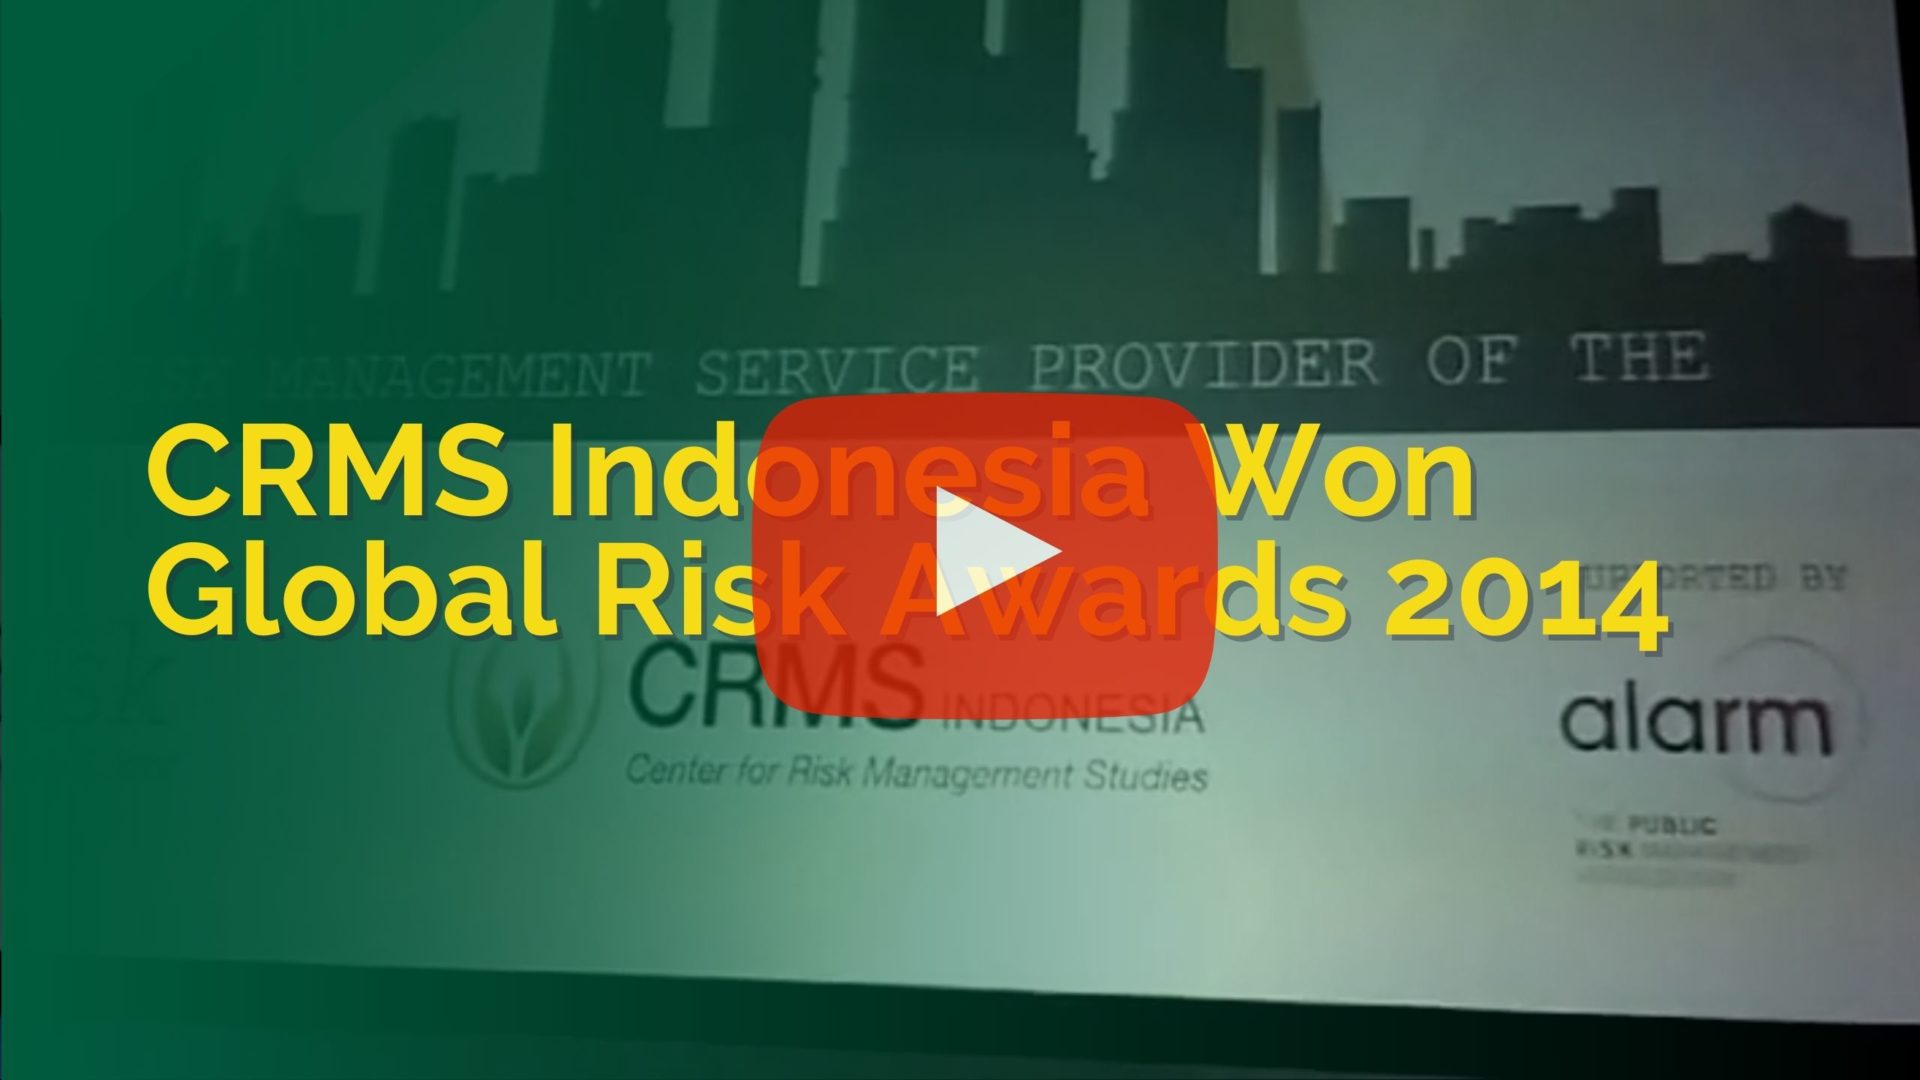 CRMS Indonesia Won Global Risk Awards 2014